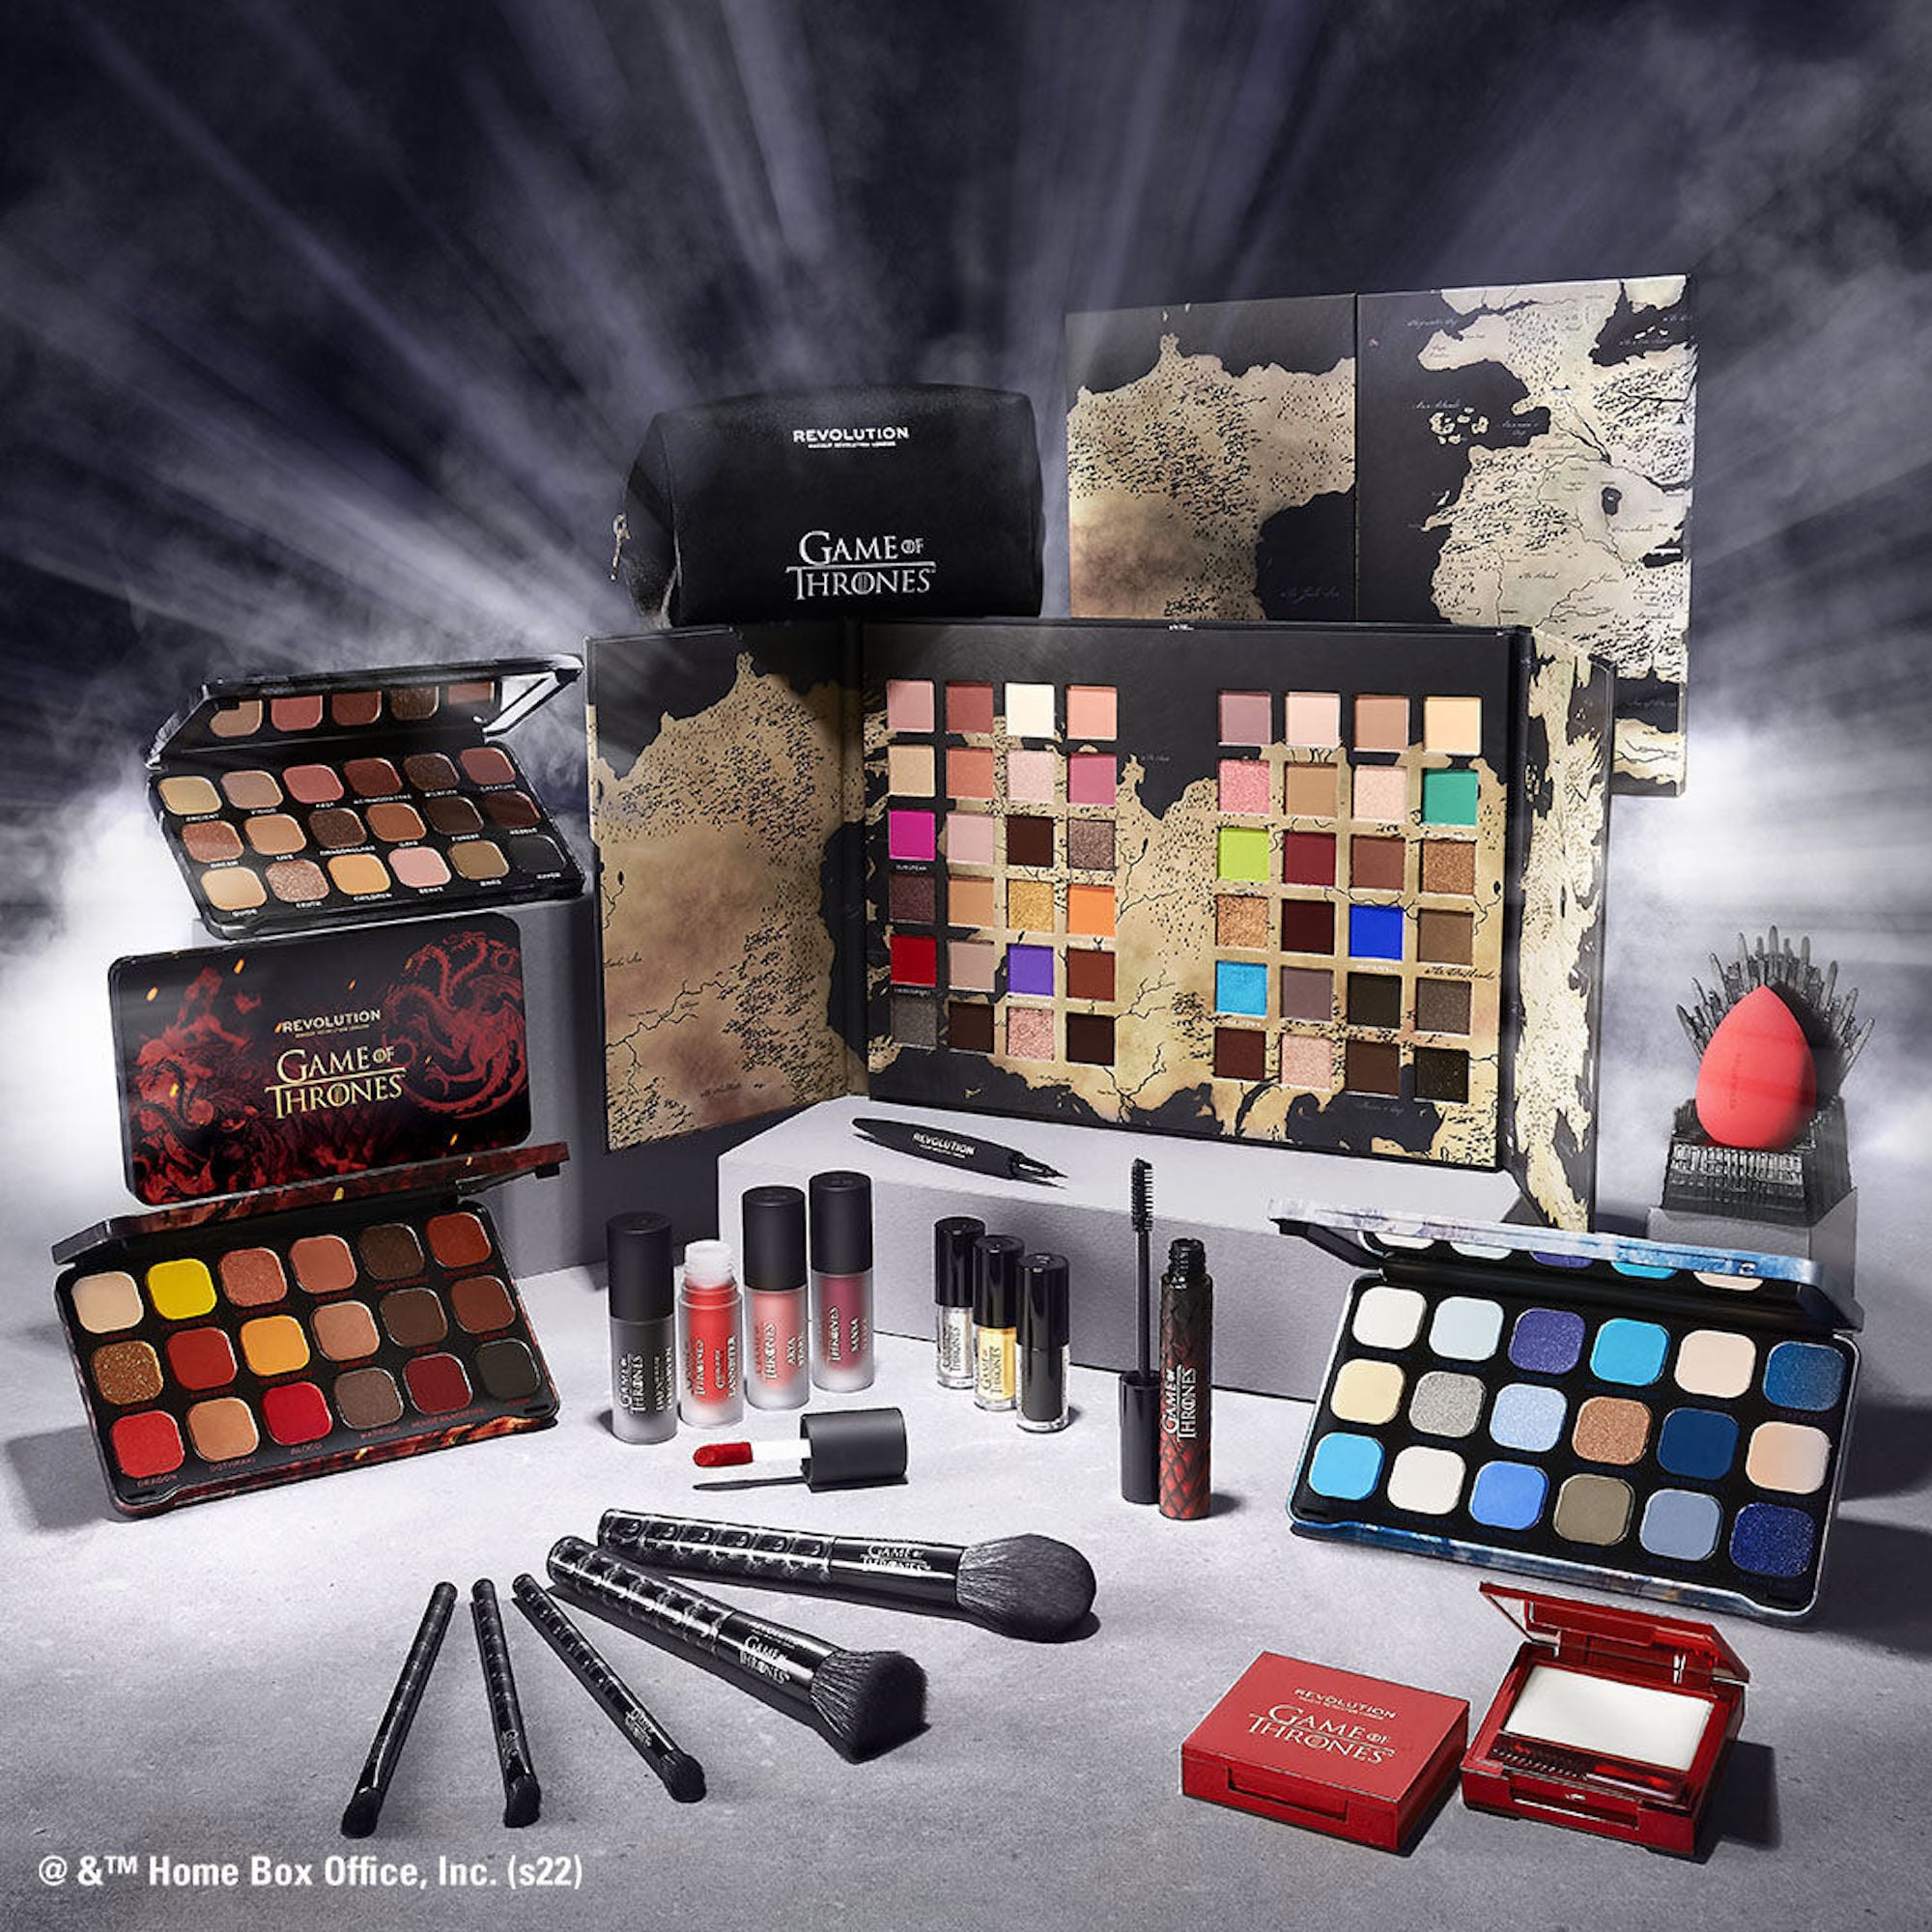 Revolution Beauty x Game of Thrones Makeup Collection